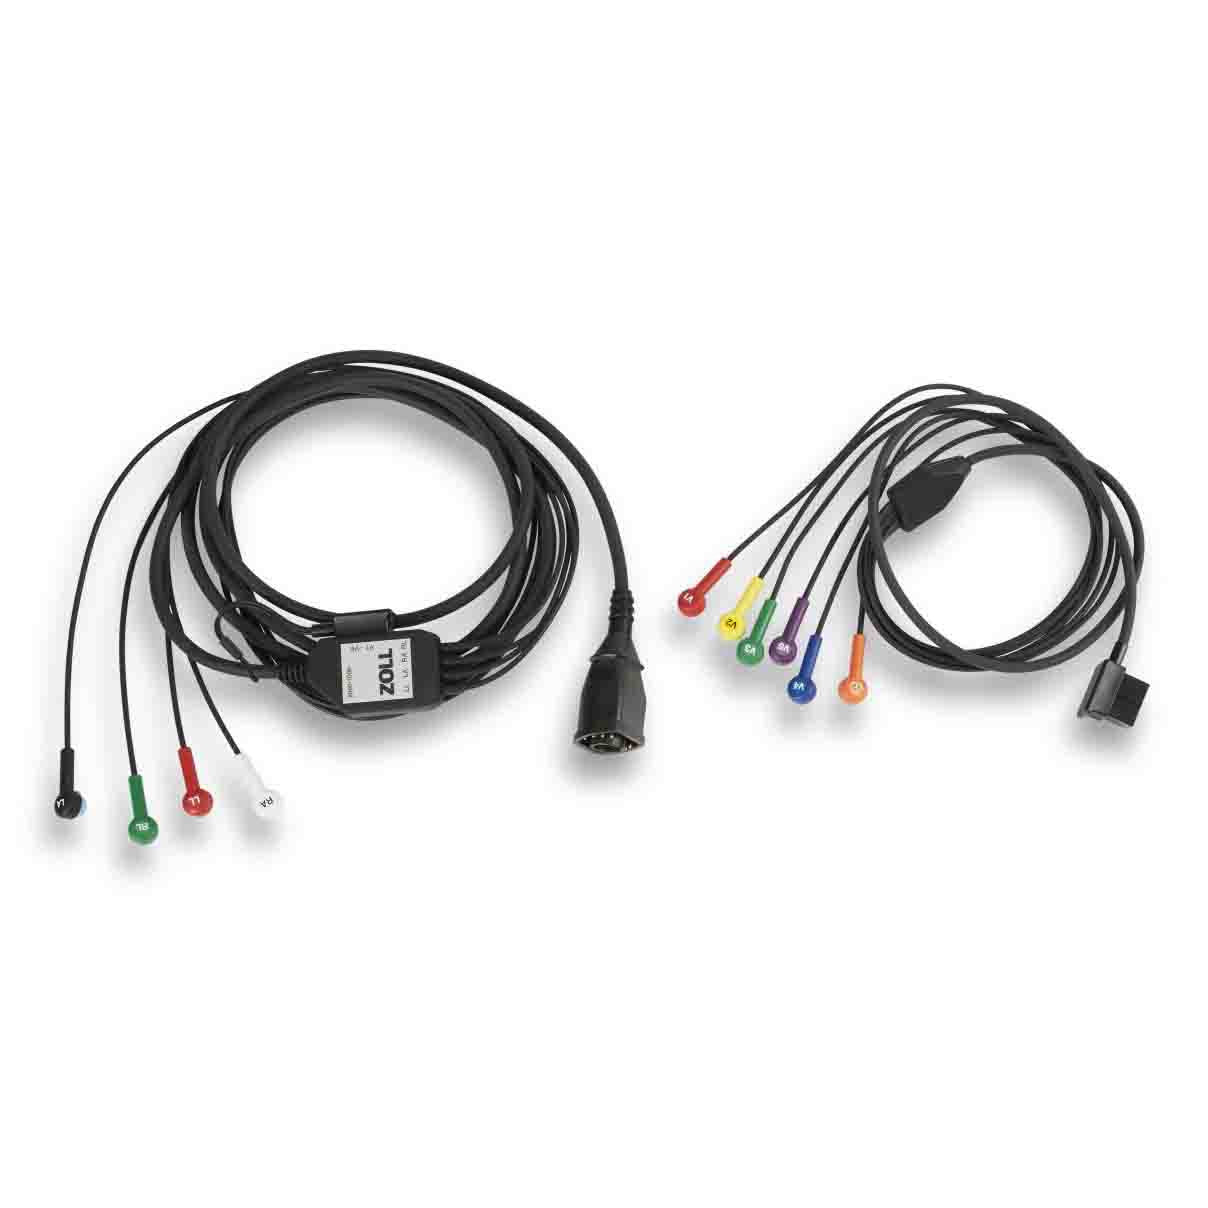 Zoll 1-Step Patient Cable for 12-Lead ECG with Limb-Lead and V-Lead Cables